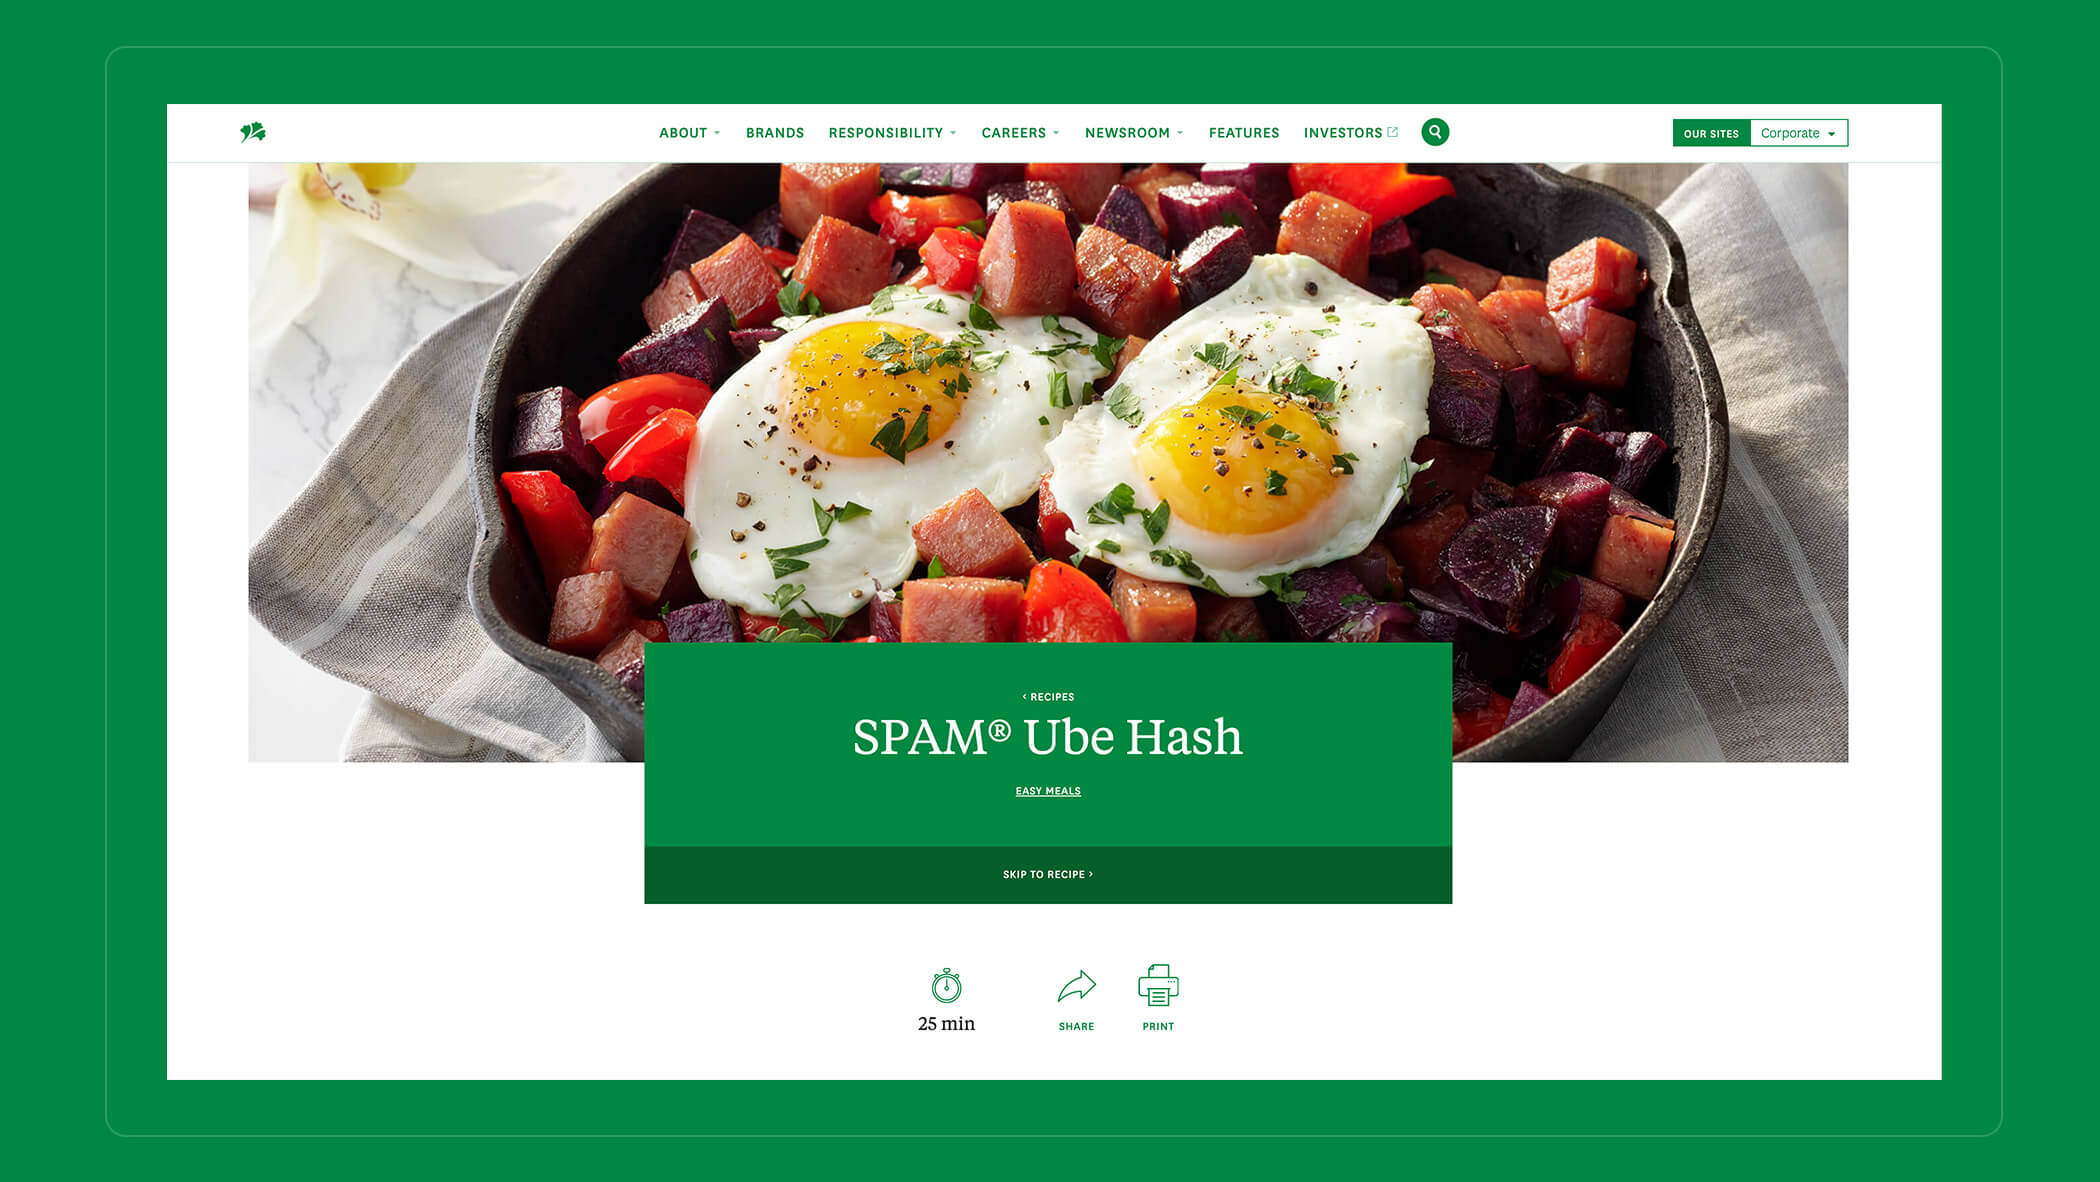 the introduction to a recipe about SPAM